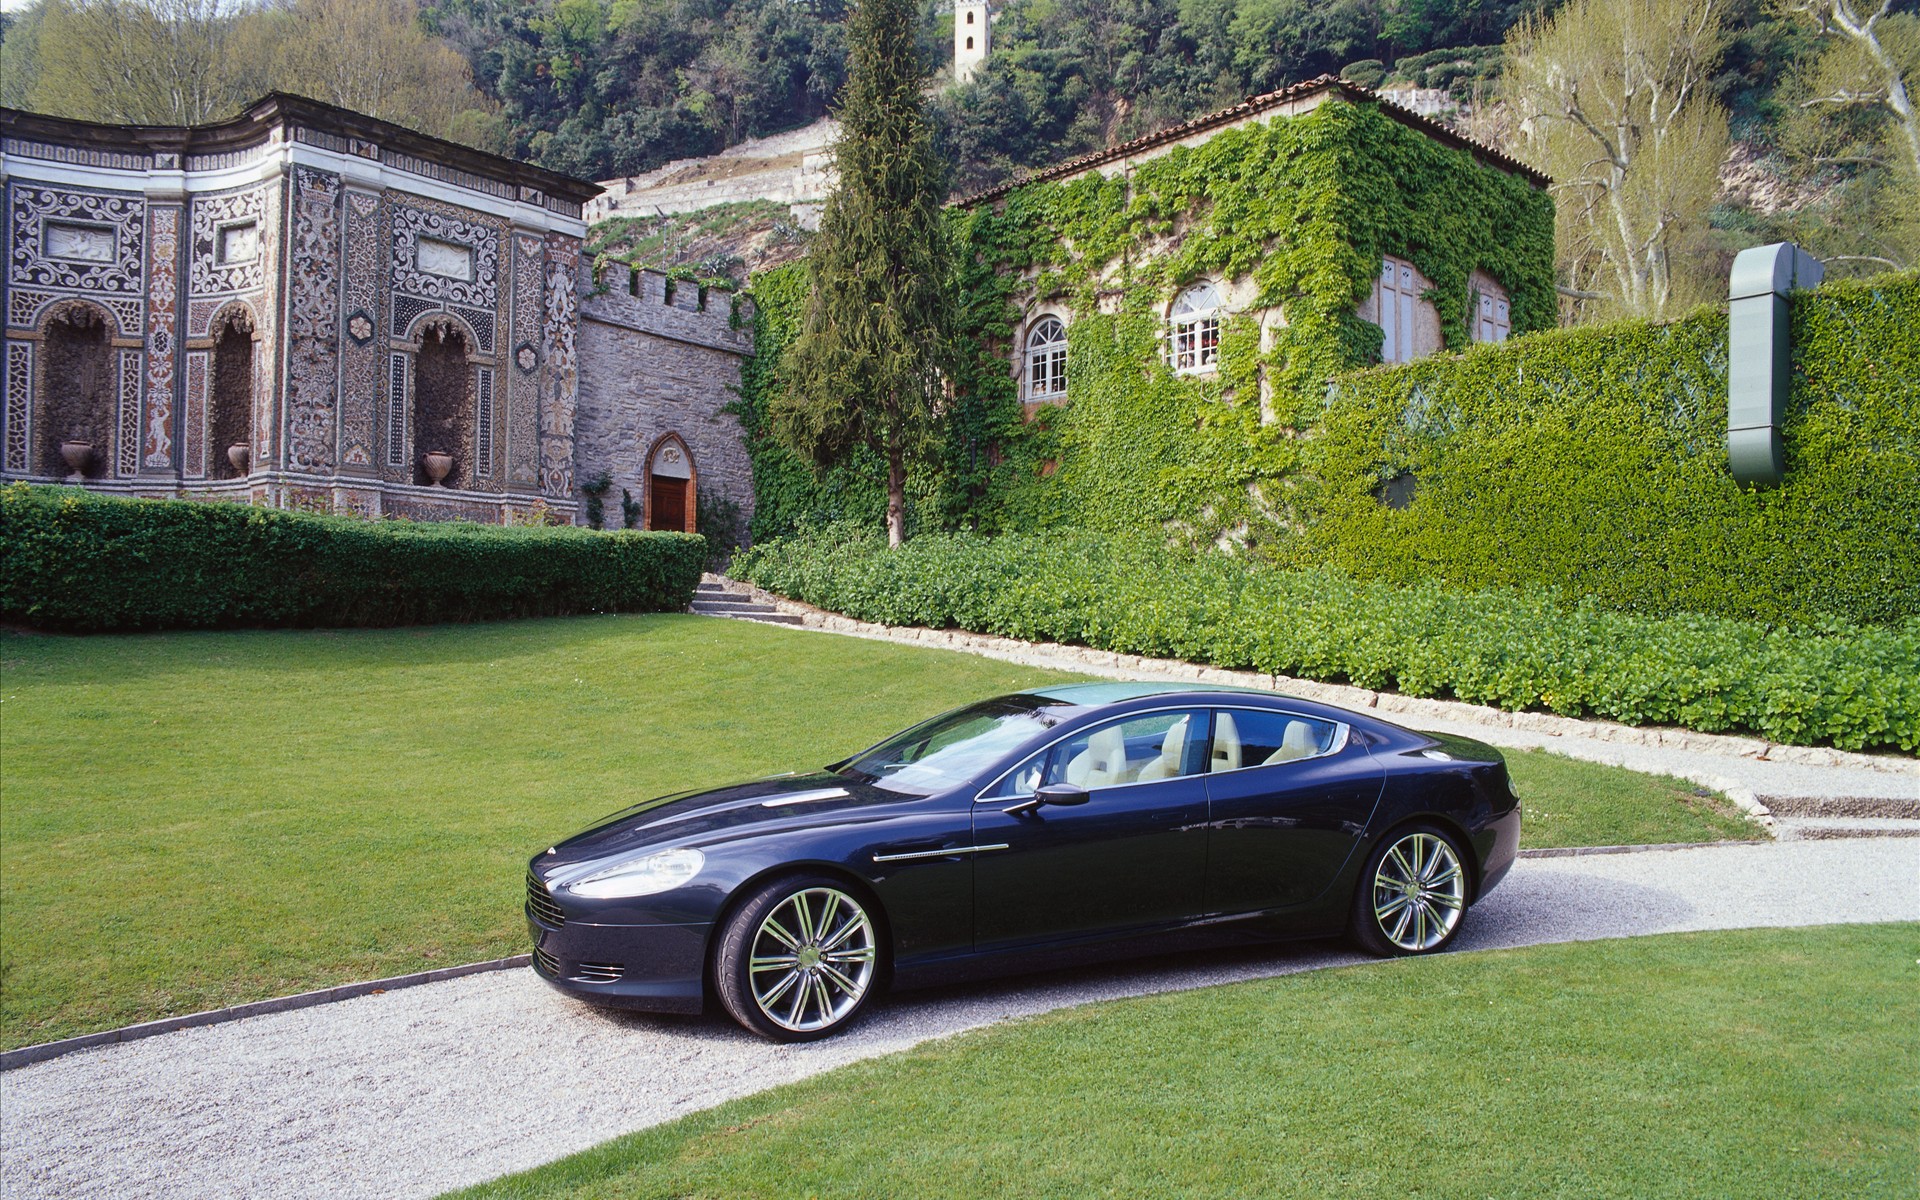 From the archives: a 2010 road trip in Aston Martin's new Rapide | Top Gear